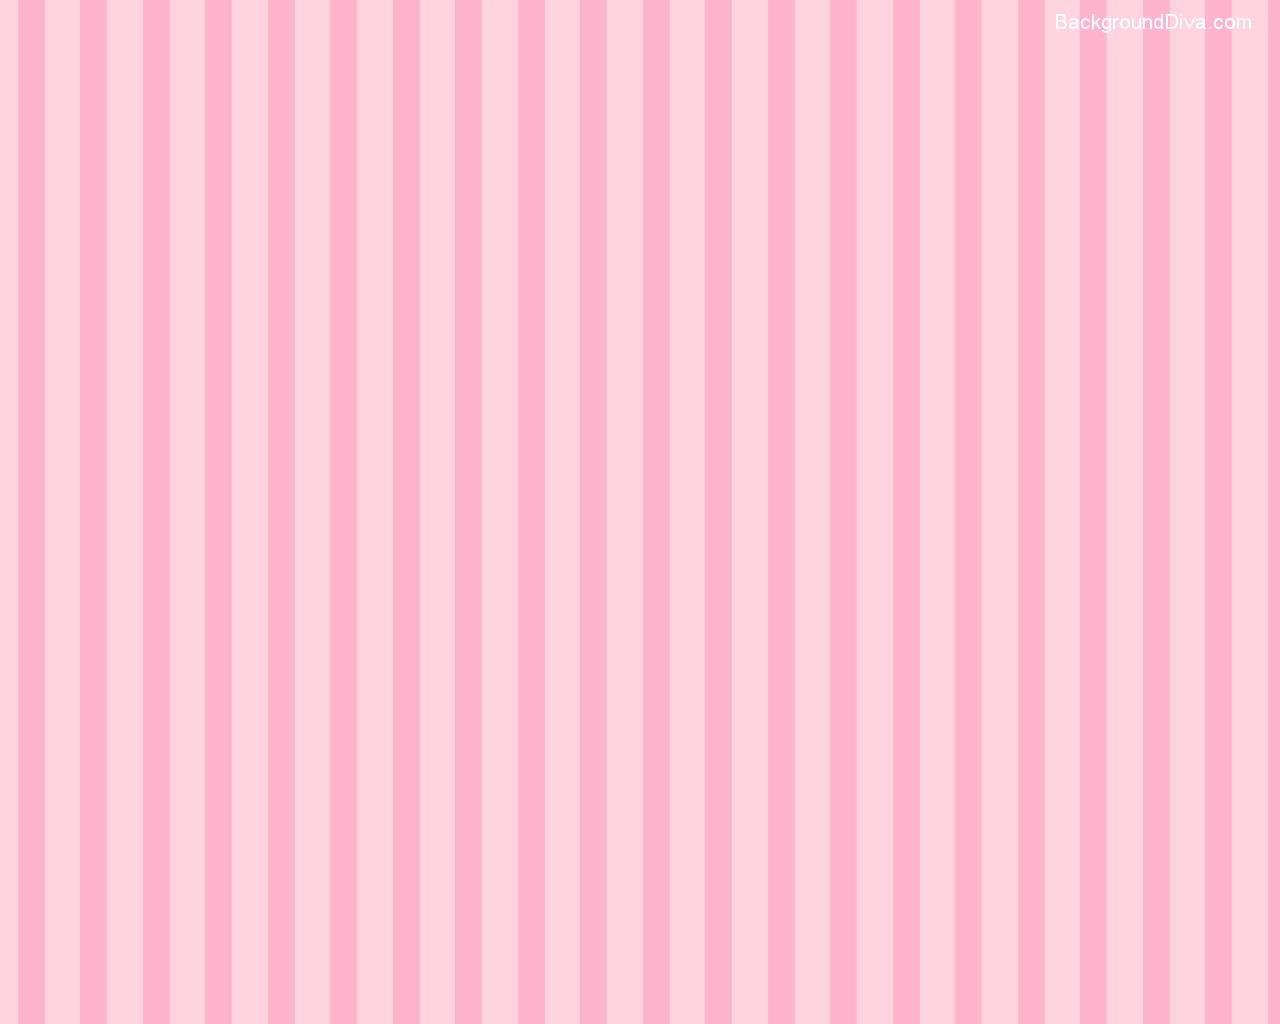 P Pink And White Widescreen Image